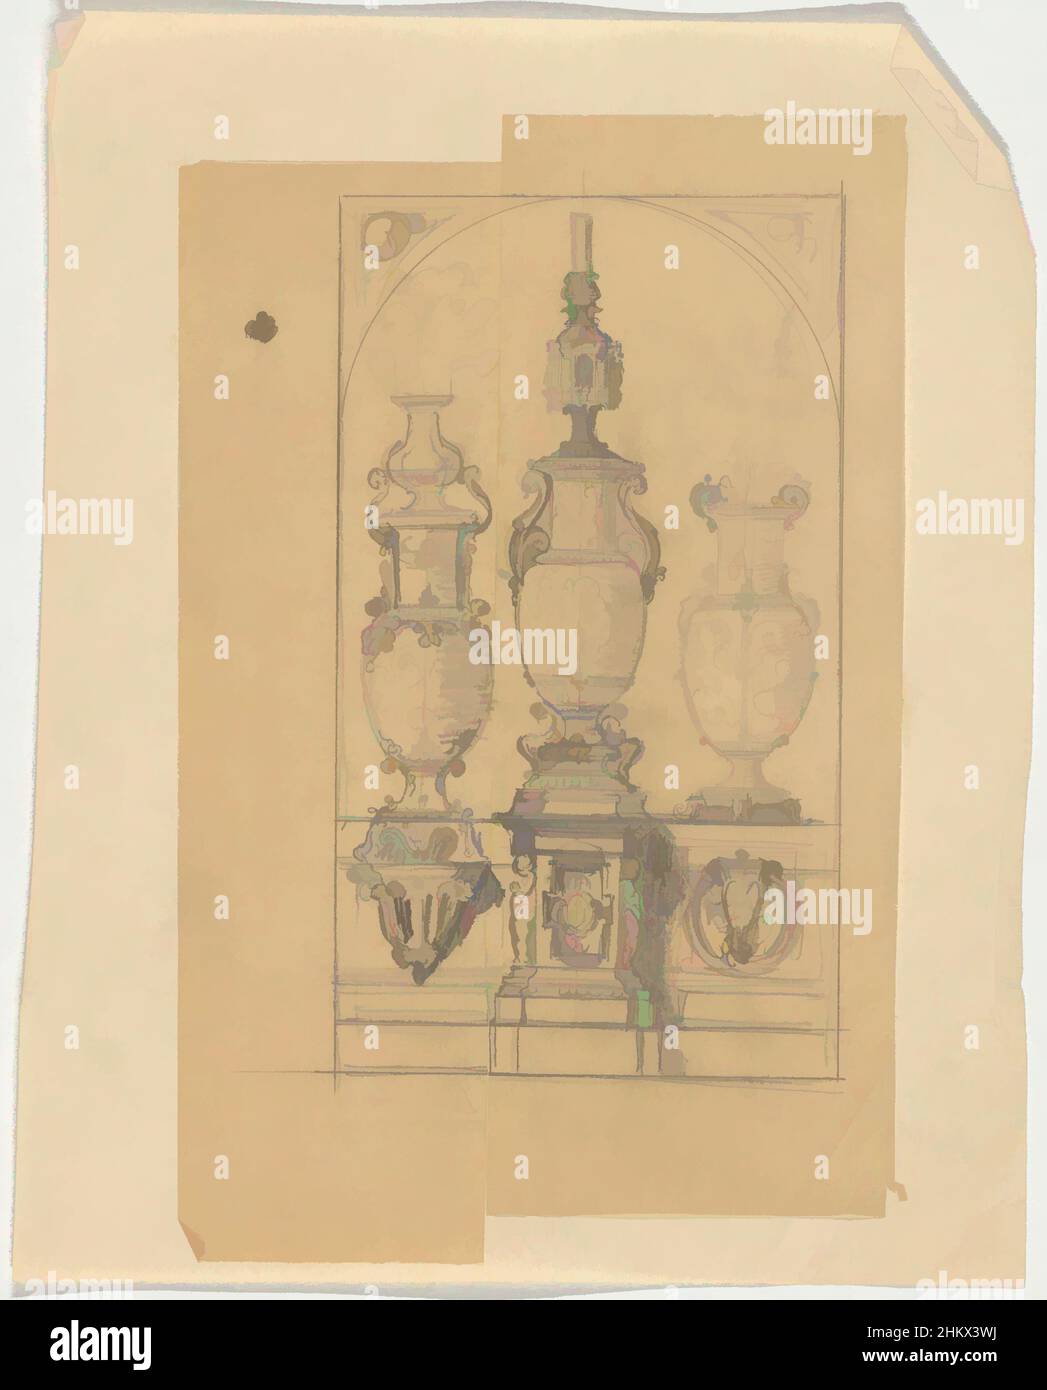 Art inspired by Three vases, draughtsman: Firma Feuchère, Paris, c. 1830 - c. 1850, paper, tracing paper, height 209 mm × width 261 mm, Classic works modernized by Artotop with a splash of modernity. Shapes, color and value, eye-catching visual impact on art. Emotions through freedom of artworks in a contemporary way. A timeless message pursuing a wildly creative new direction. Artists turning to the digital medium and creating the Artotop NFT Stock Photo